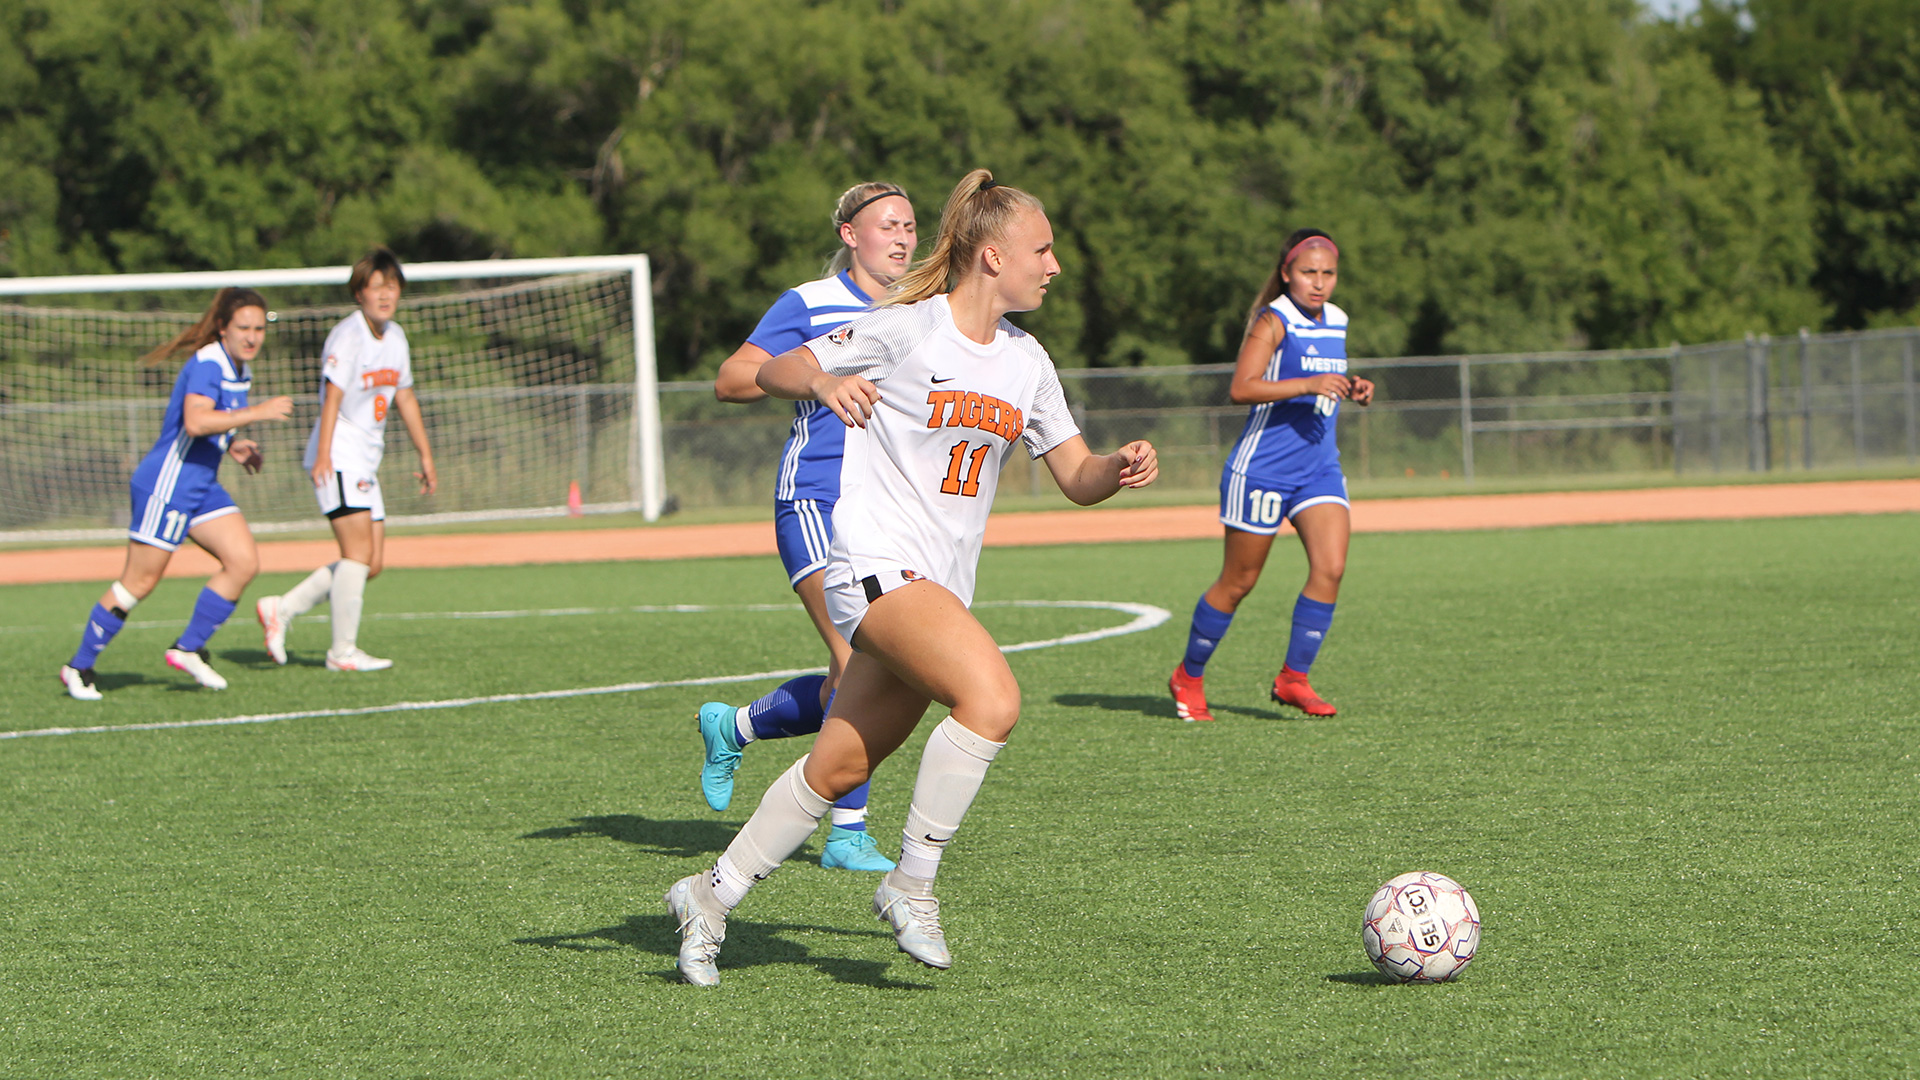 Four Lady Tigers score in 4-1 win over Western Texas College